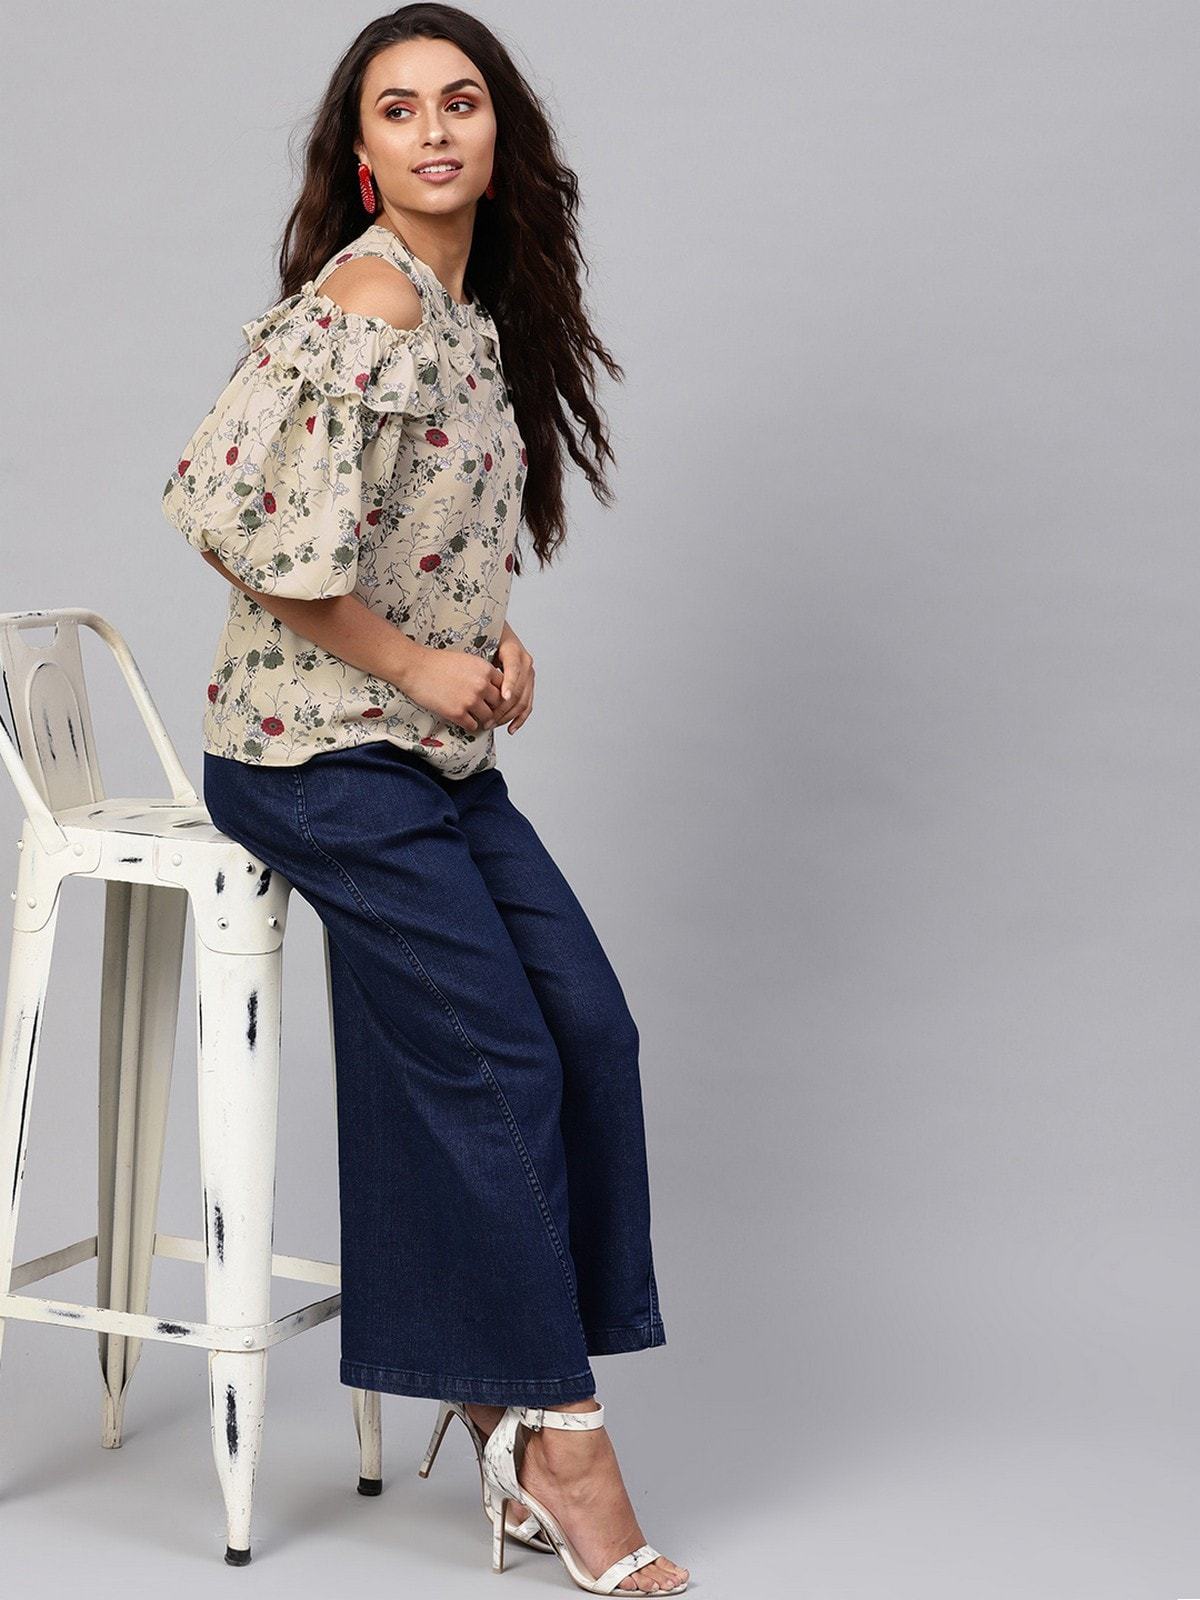 Women's Floral Cold-Shoulder Top With Voluminous Sleeves - Pannkh